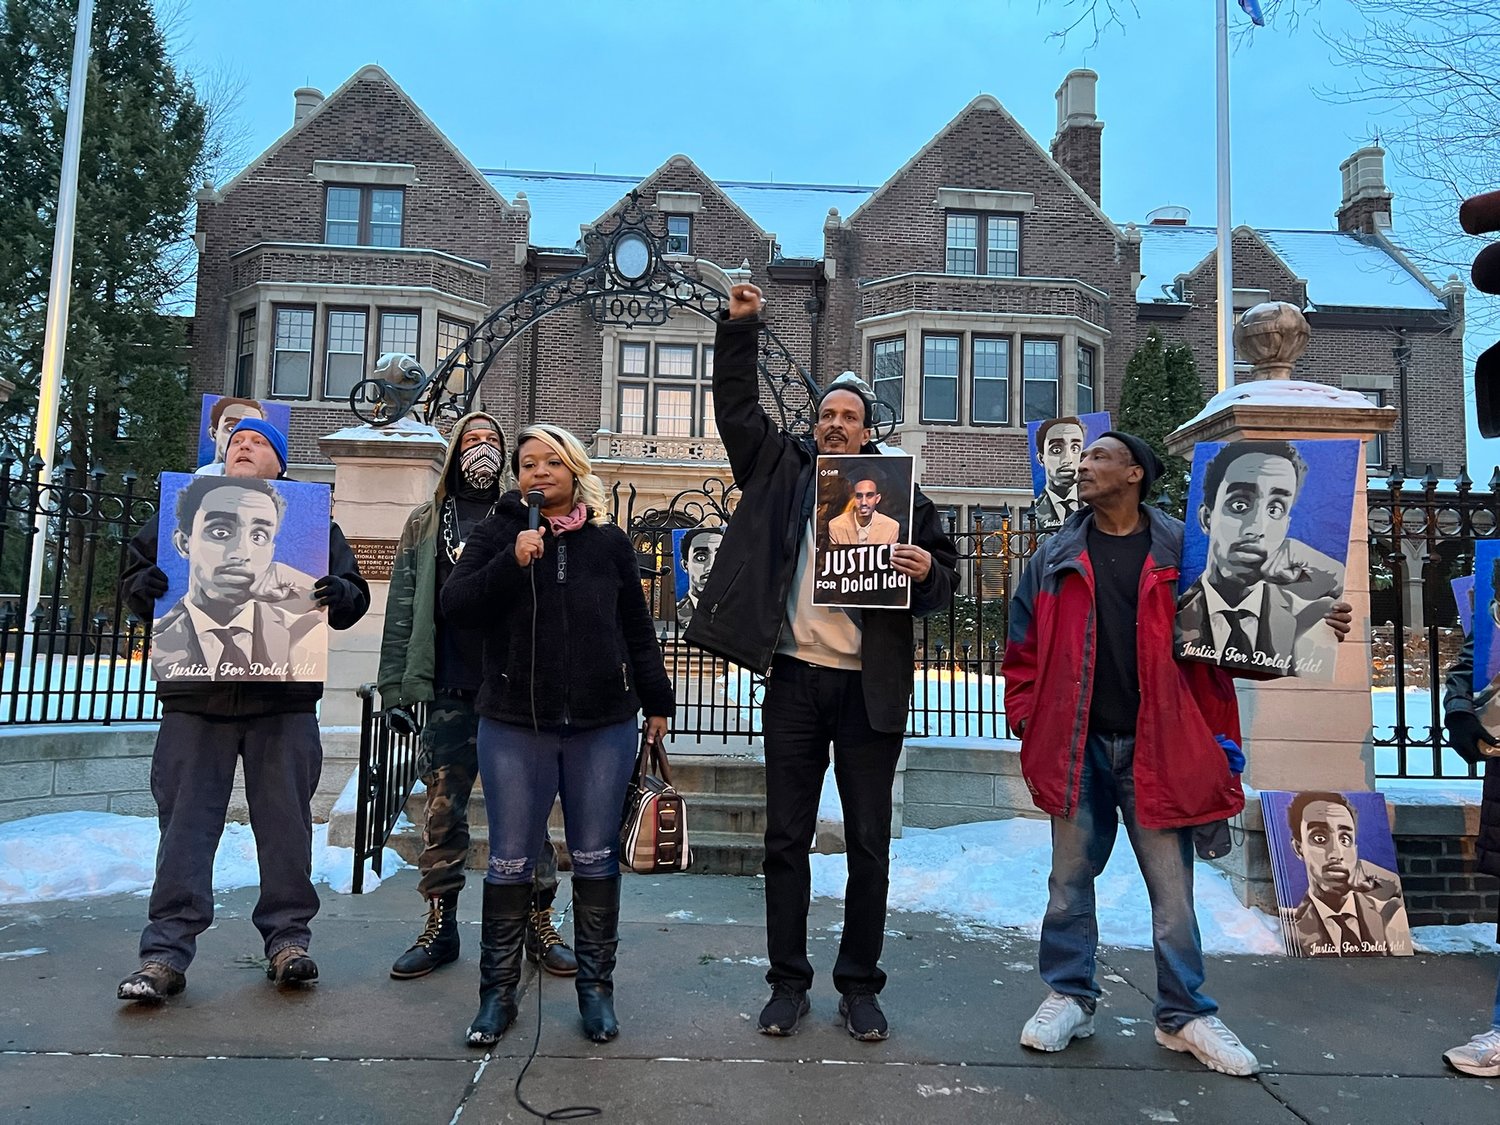 Toshira Garraway Allen speaks on Jan. 4, 2022. Bayle Gelle, Dolal Idd’s father, stands next to her, fist raised. Demonstrators marched from Summit Ave. to Grand Ave., around the governor’s residence and back.